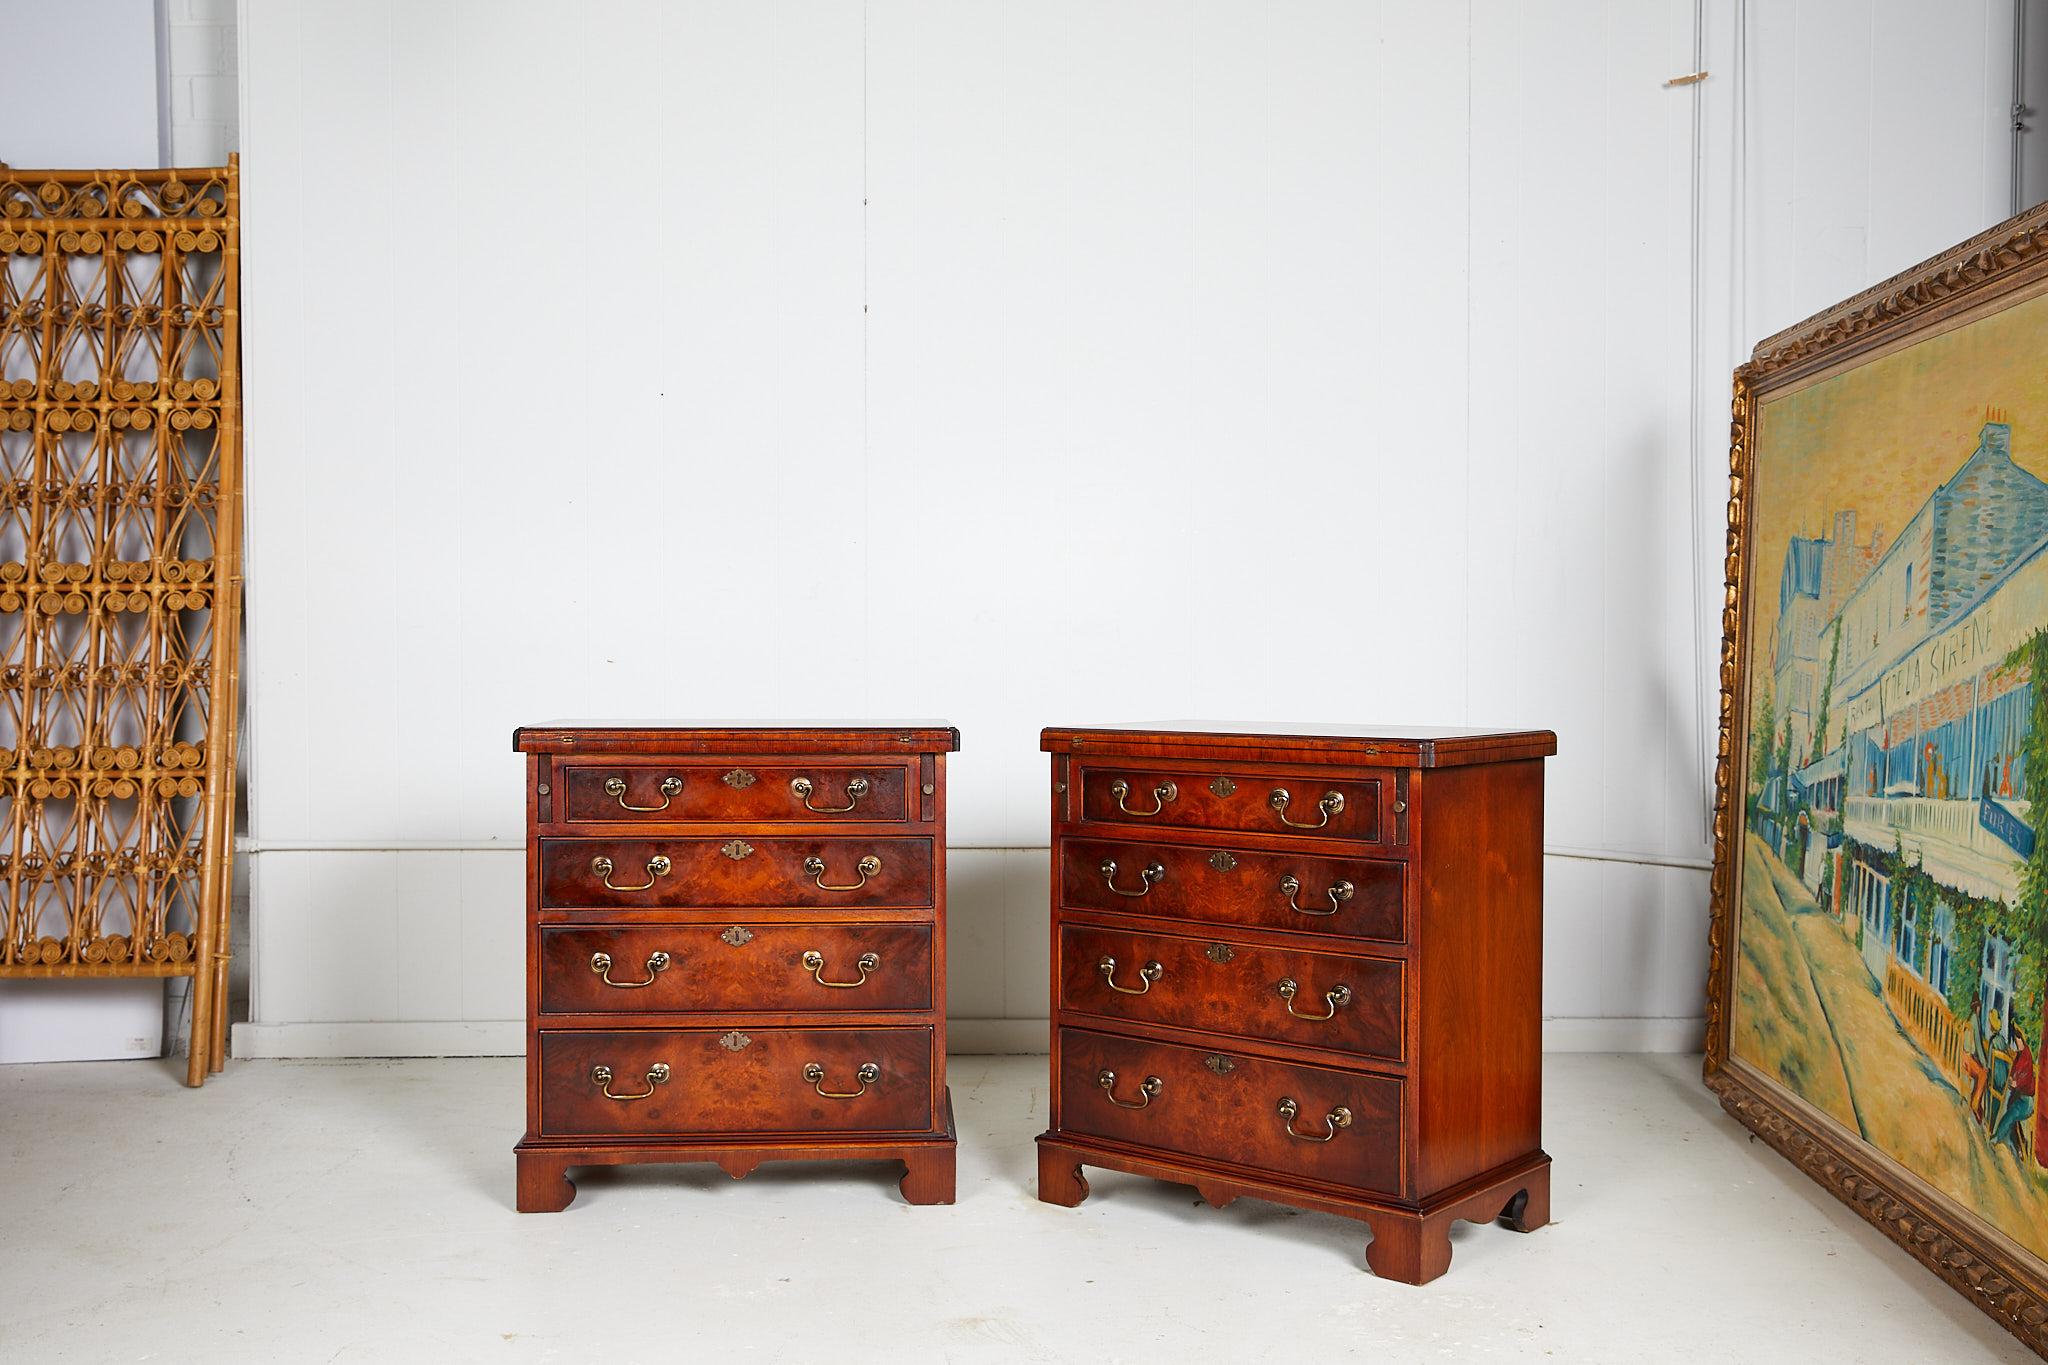 20th century petite pair of Georgian style bachelor's chests beautifully veneered in mahogany and burl walnut with feather banded details on the table top. The chests feature a shaped fold over rectangular top supported by two pull-out slides (which